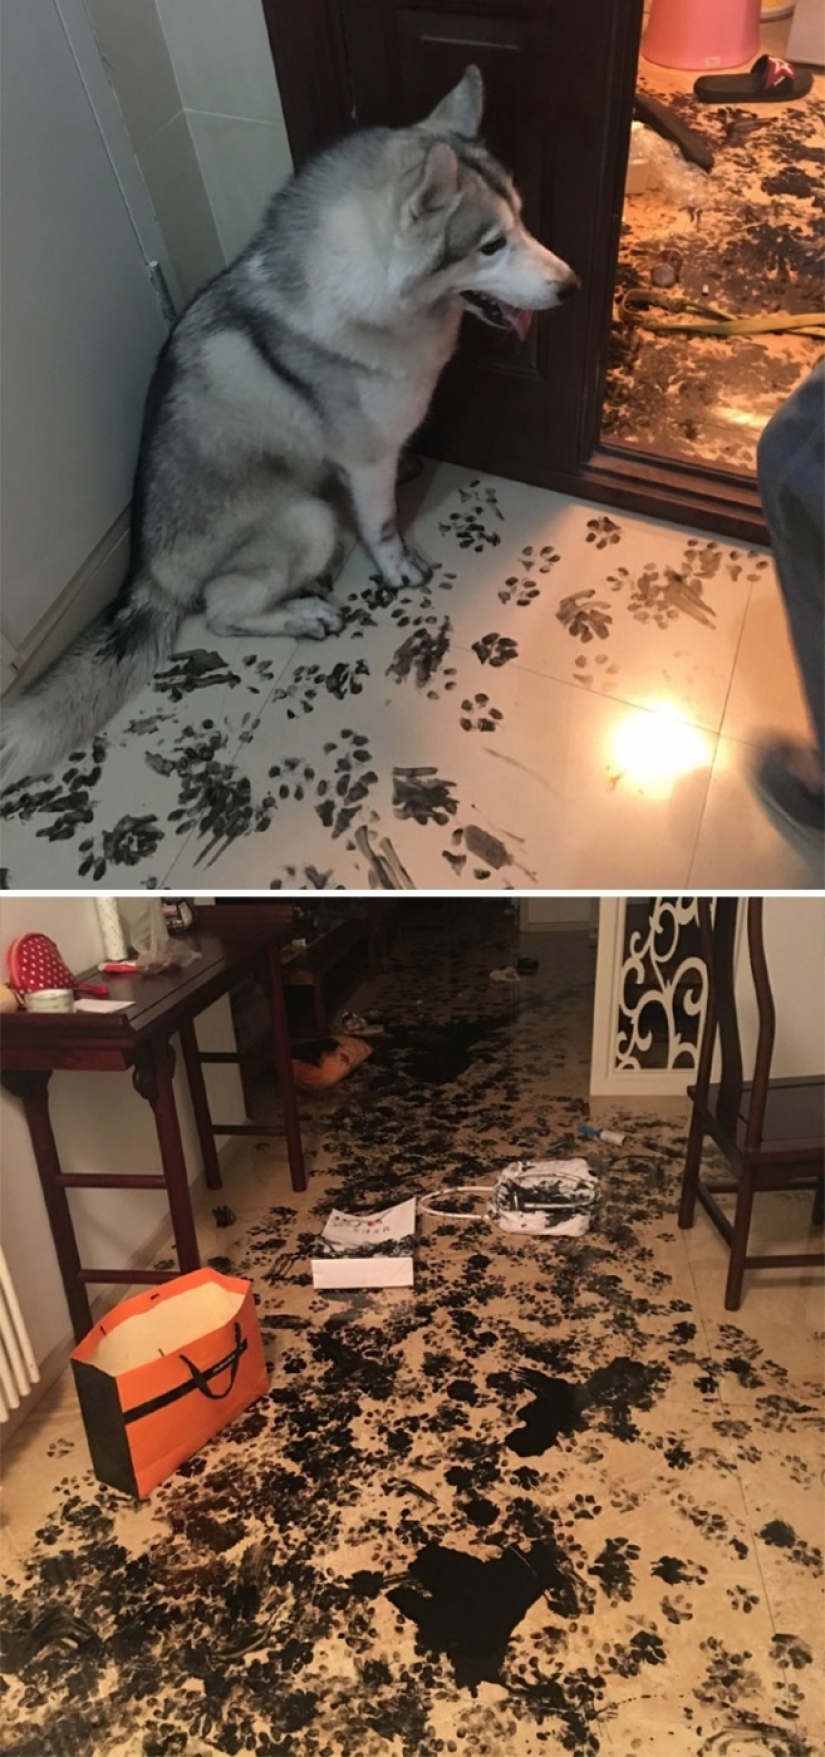 25 people who left their furry ones at home alone and bitterly regretted it